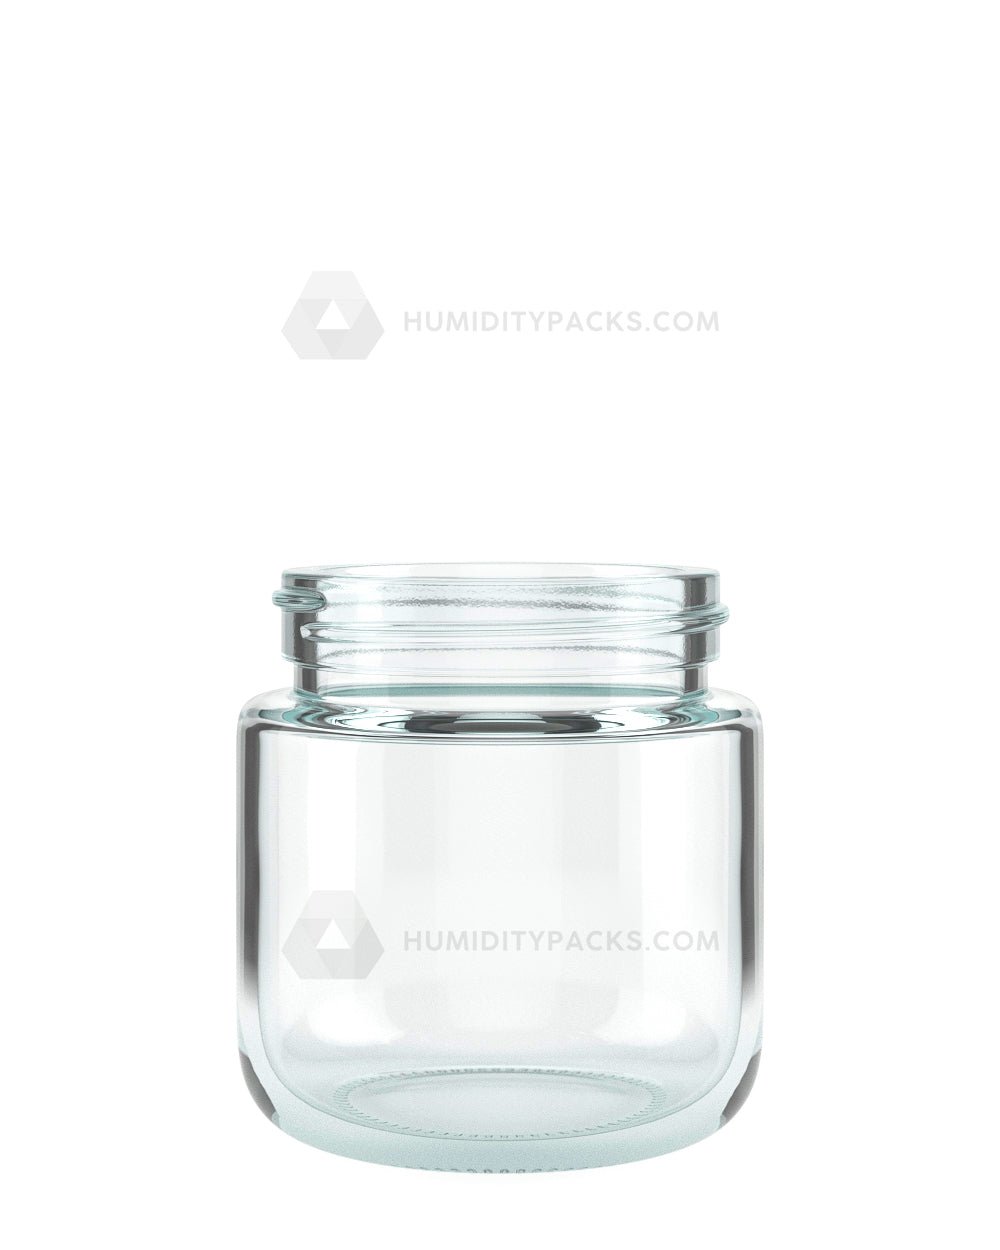 53mm Rounded Base Clear 3.75oz Glass Jar 32/Box Humidity Packs - 1